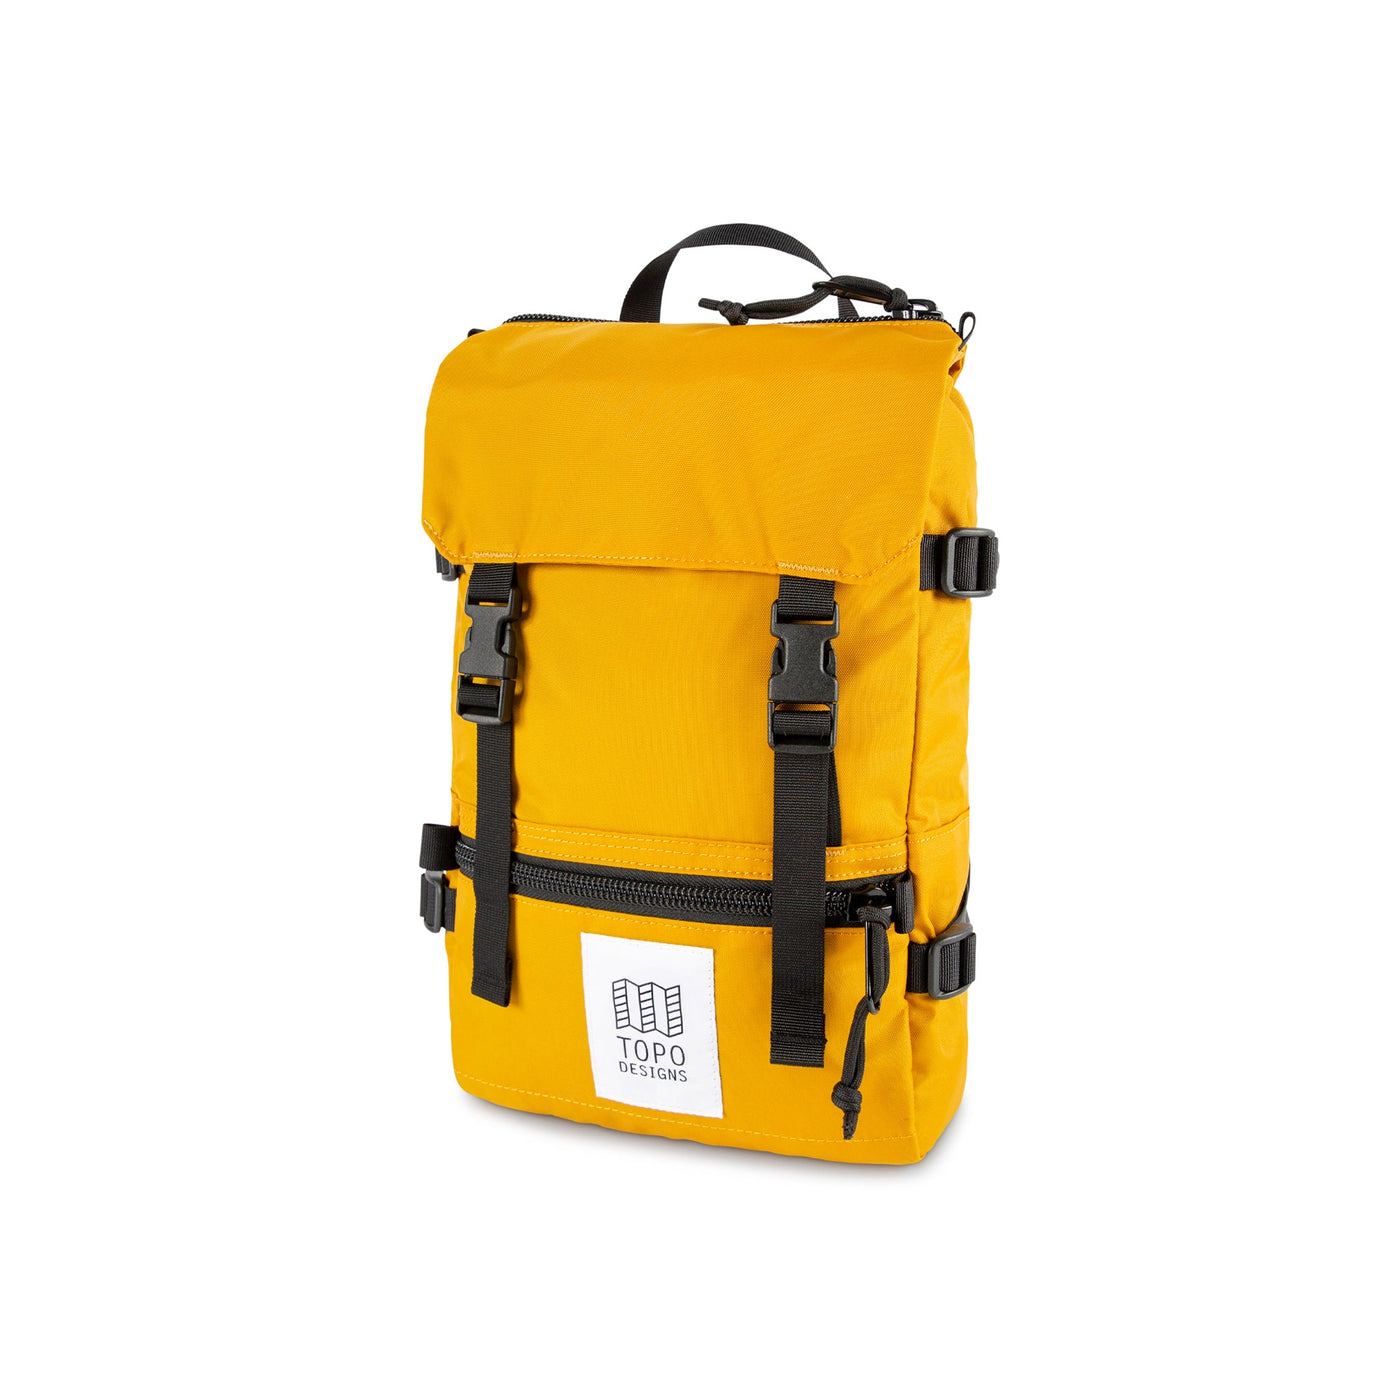 Topo Designs Rover Pack Mini backpack in "Mustard" yellow.